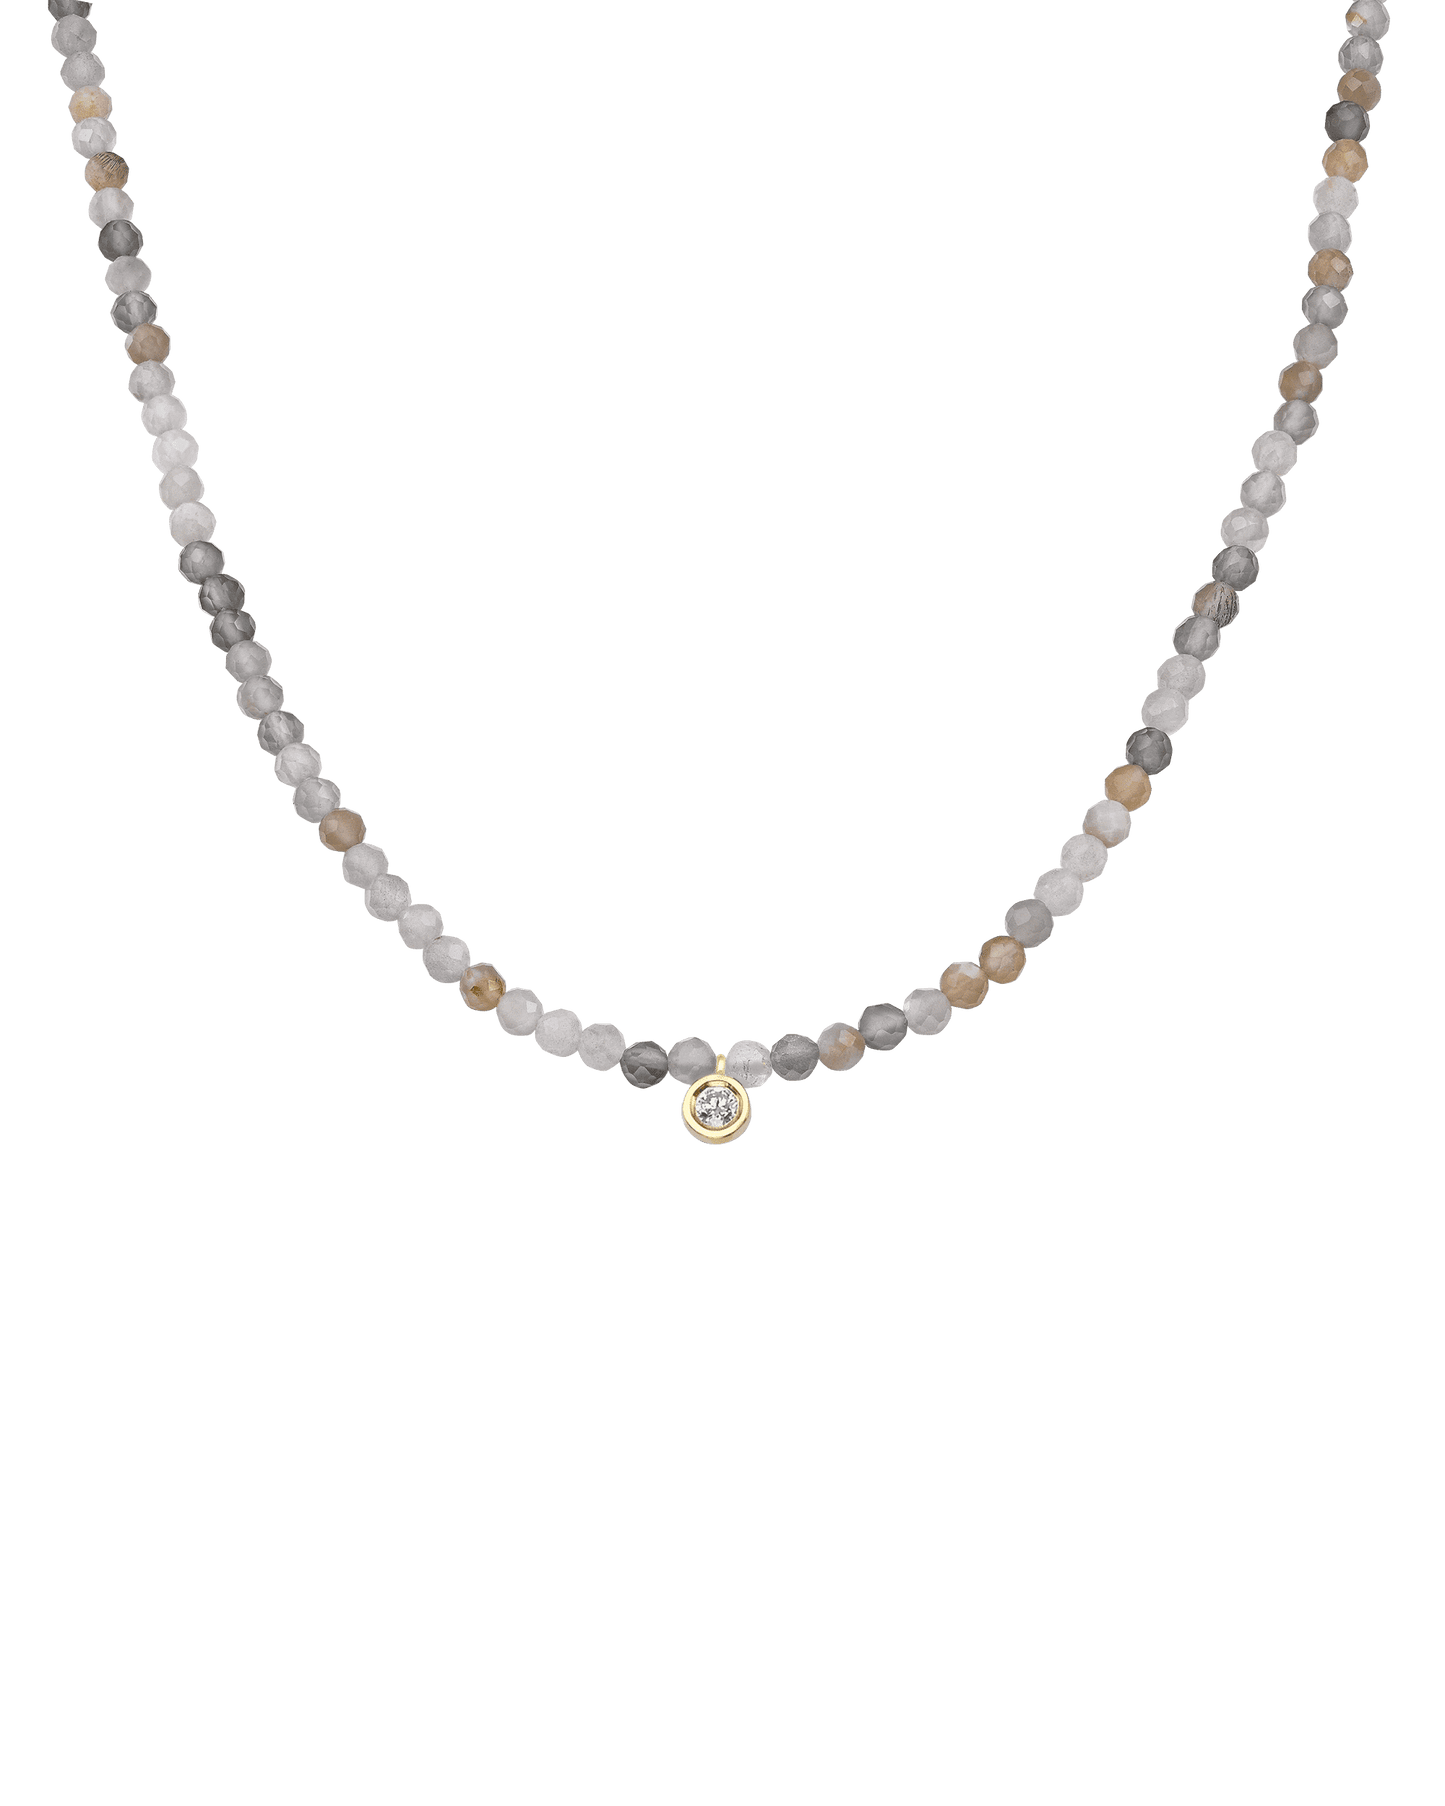 Sets of Stardust Initial Tag & Gemstone & Diamond Necklaces - 14K White Gold Necklaces 14K Solid Gold 8 Tags Medium: 0.04ct 